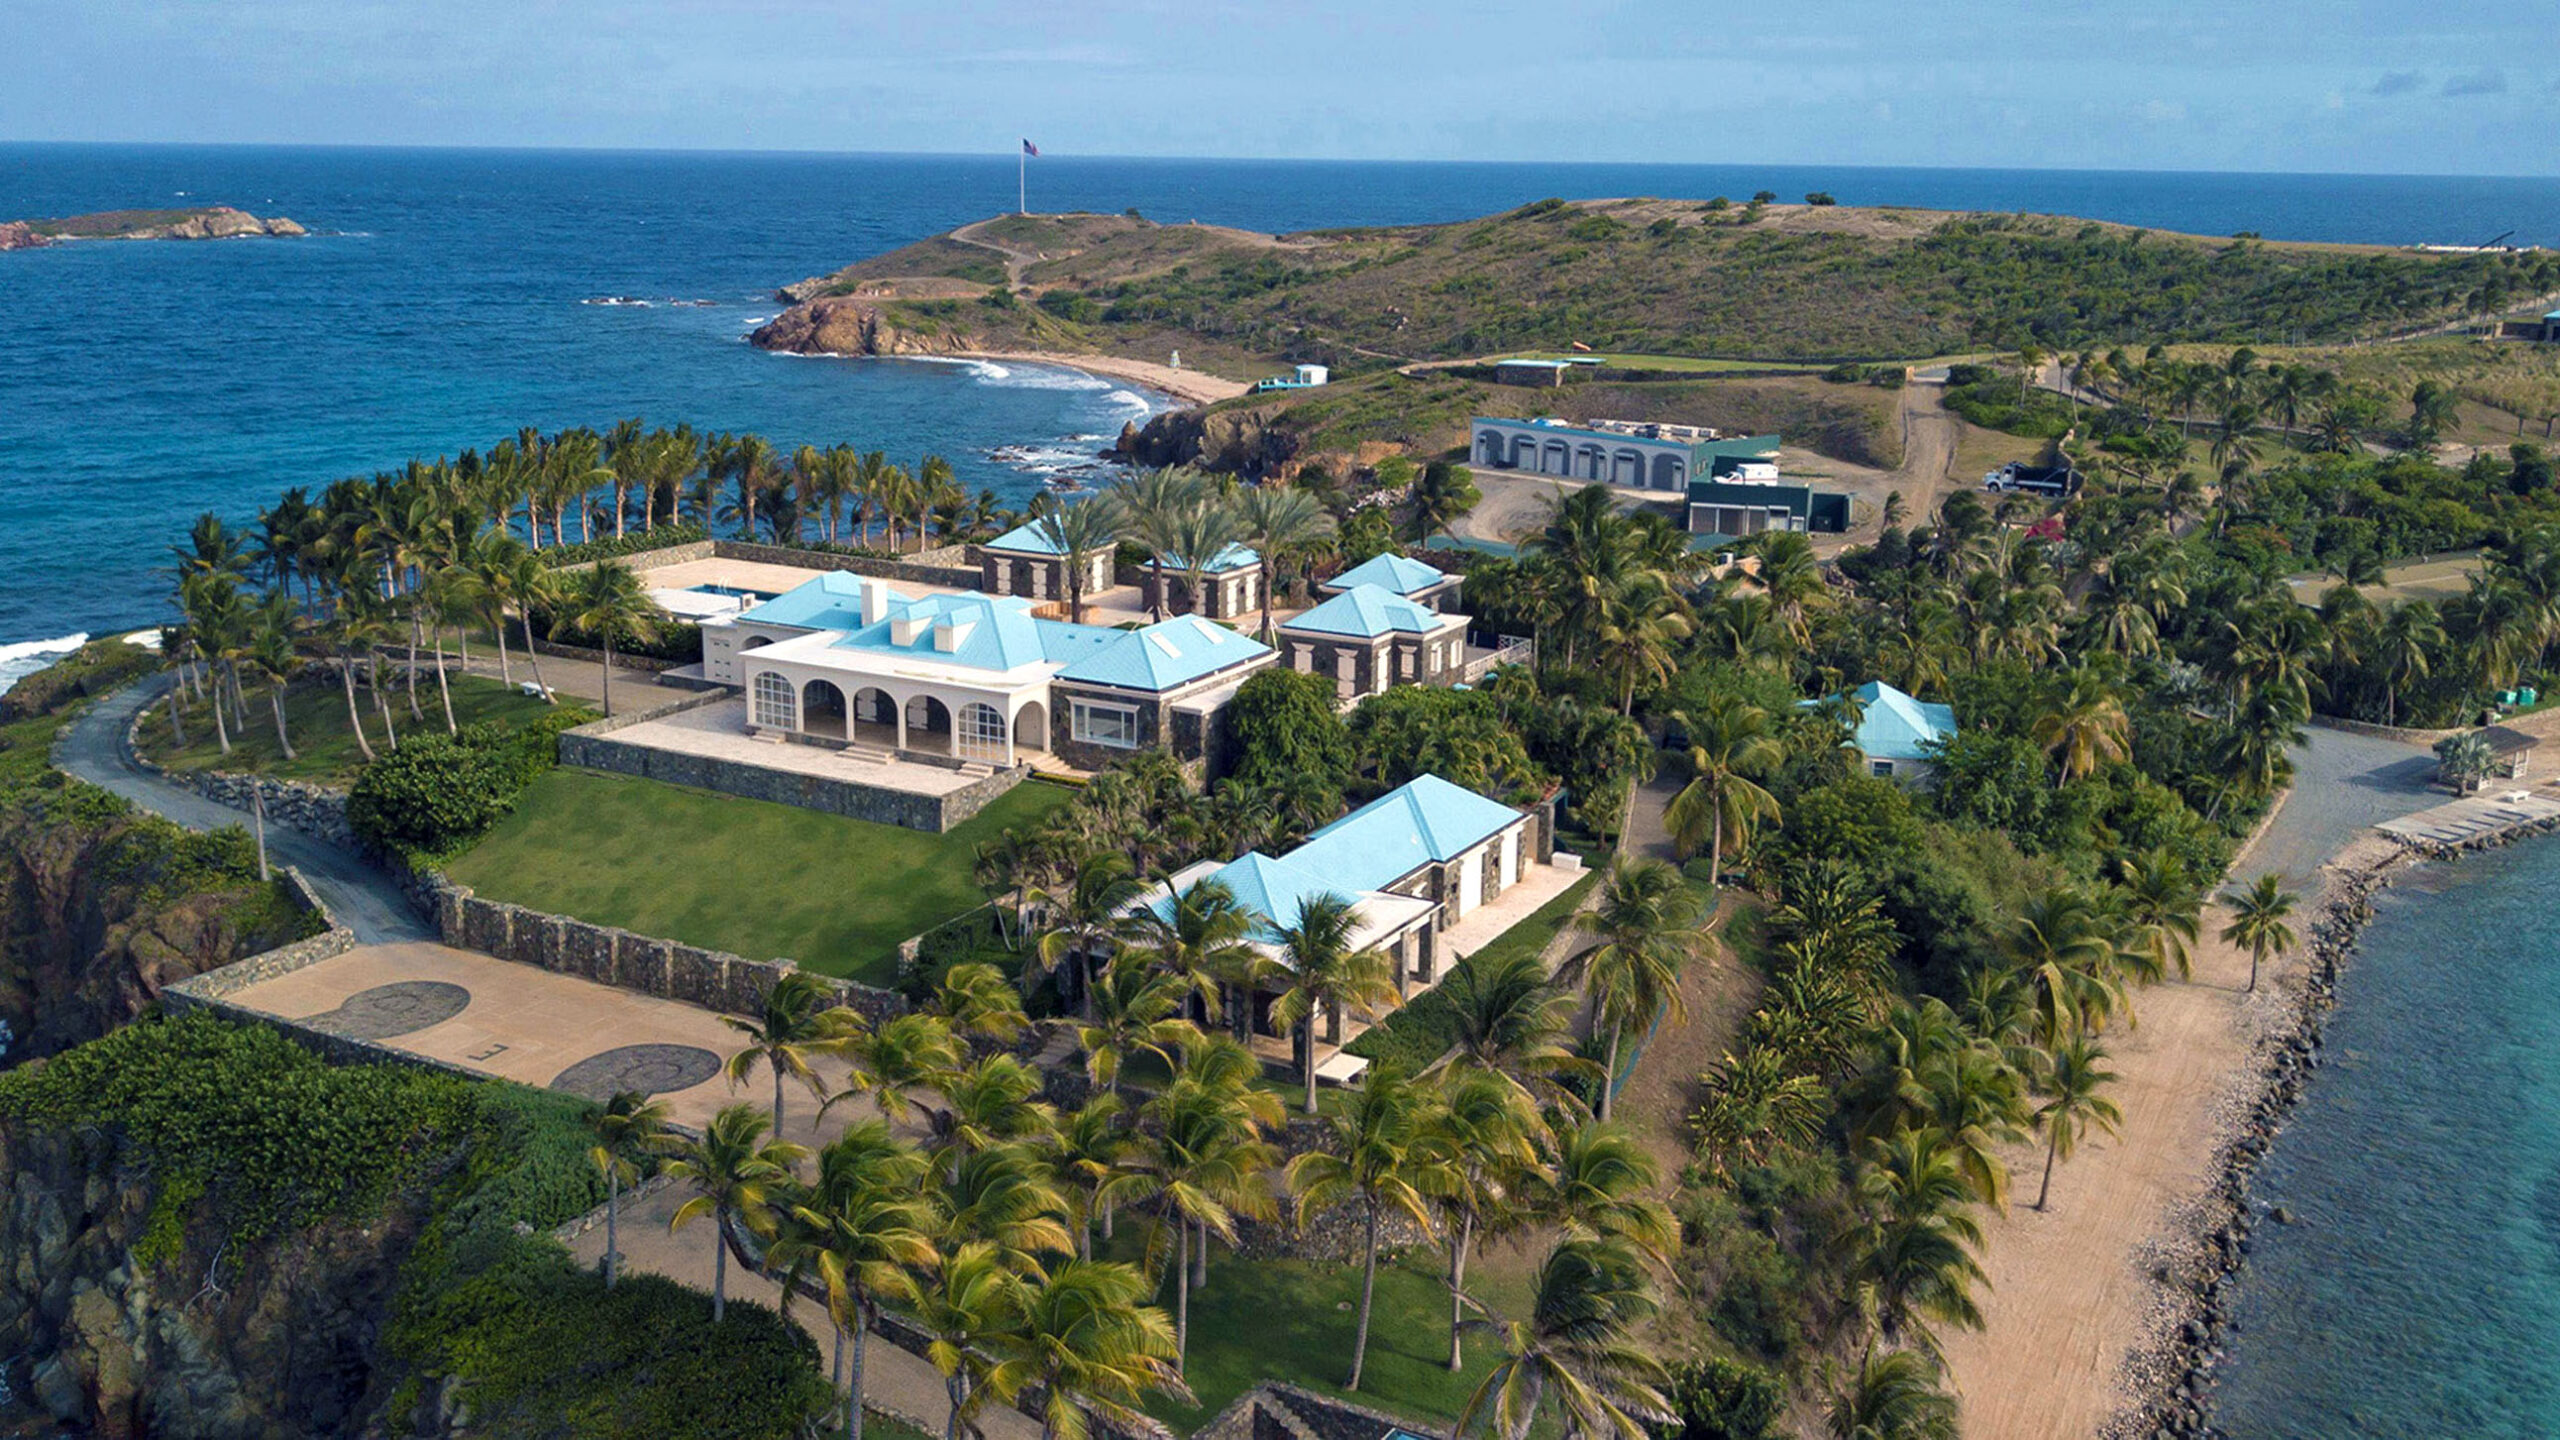 Billionaire purchases Epstein’s island, intends to transform it into a high-end resort.